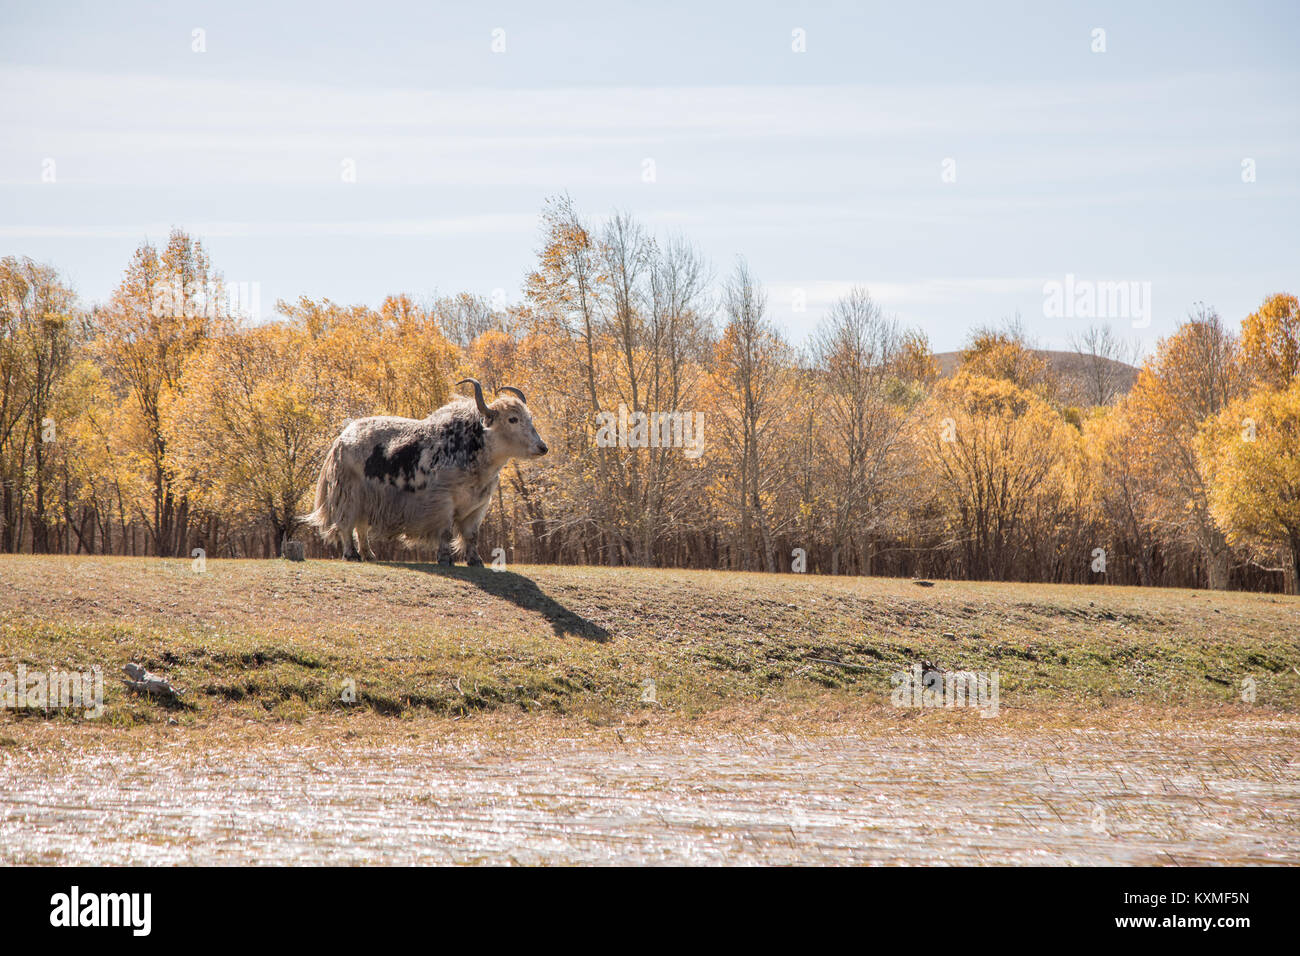 Black and white yak looking out next to swamp yellow leafs trees Mongolia Stock Photo